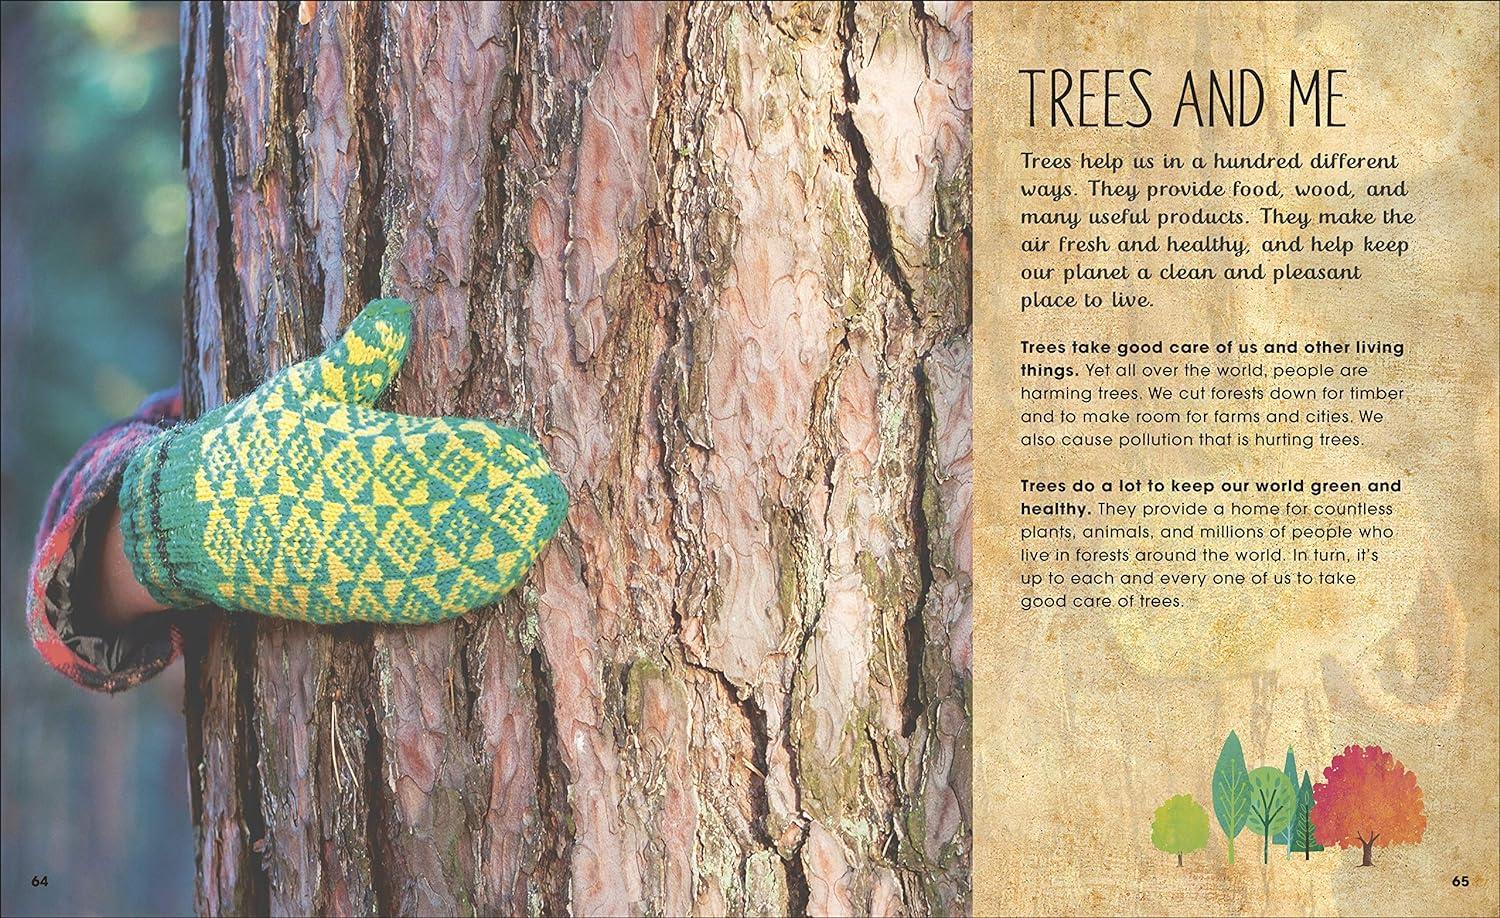 Foster Tree Appreciation in Kids with The Magic and Mystery of Trees